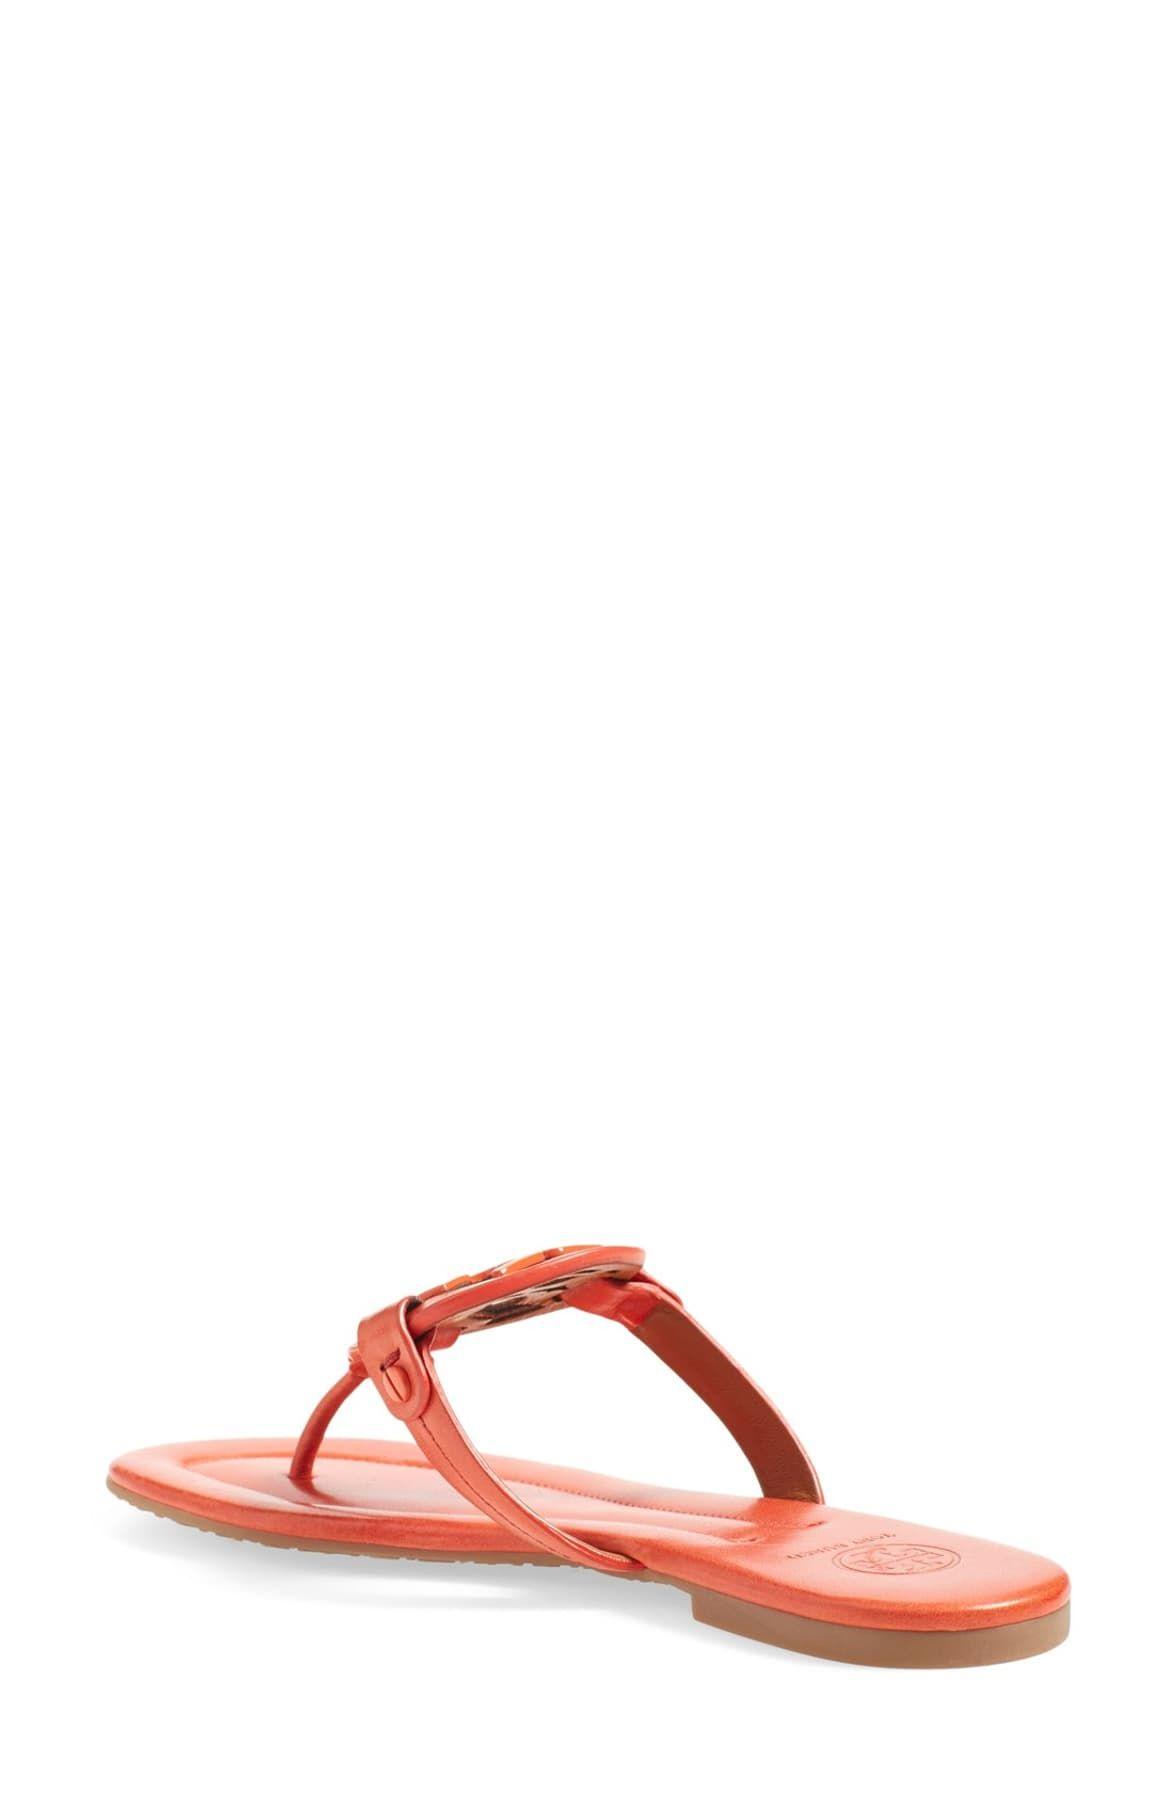 Tory Burch Miller Sandal, Leather in Red | Lyst